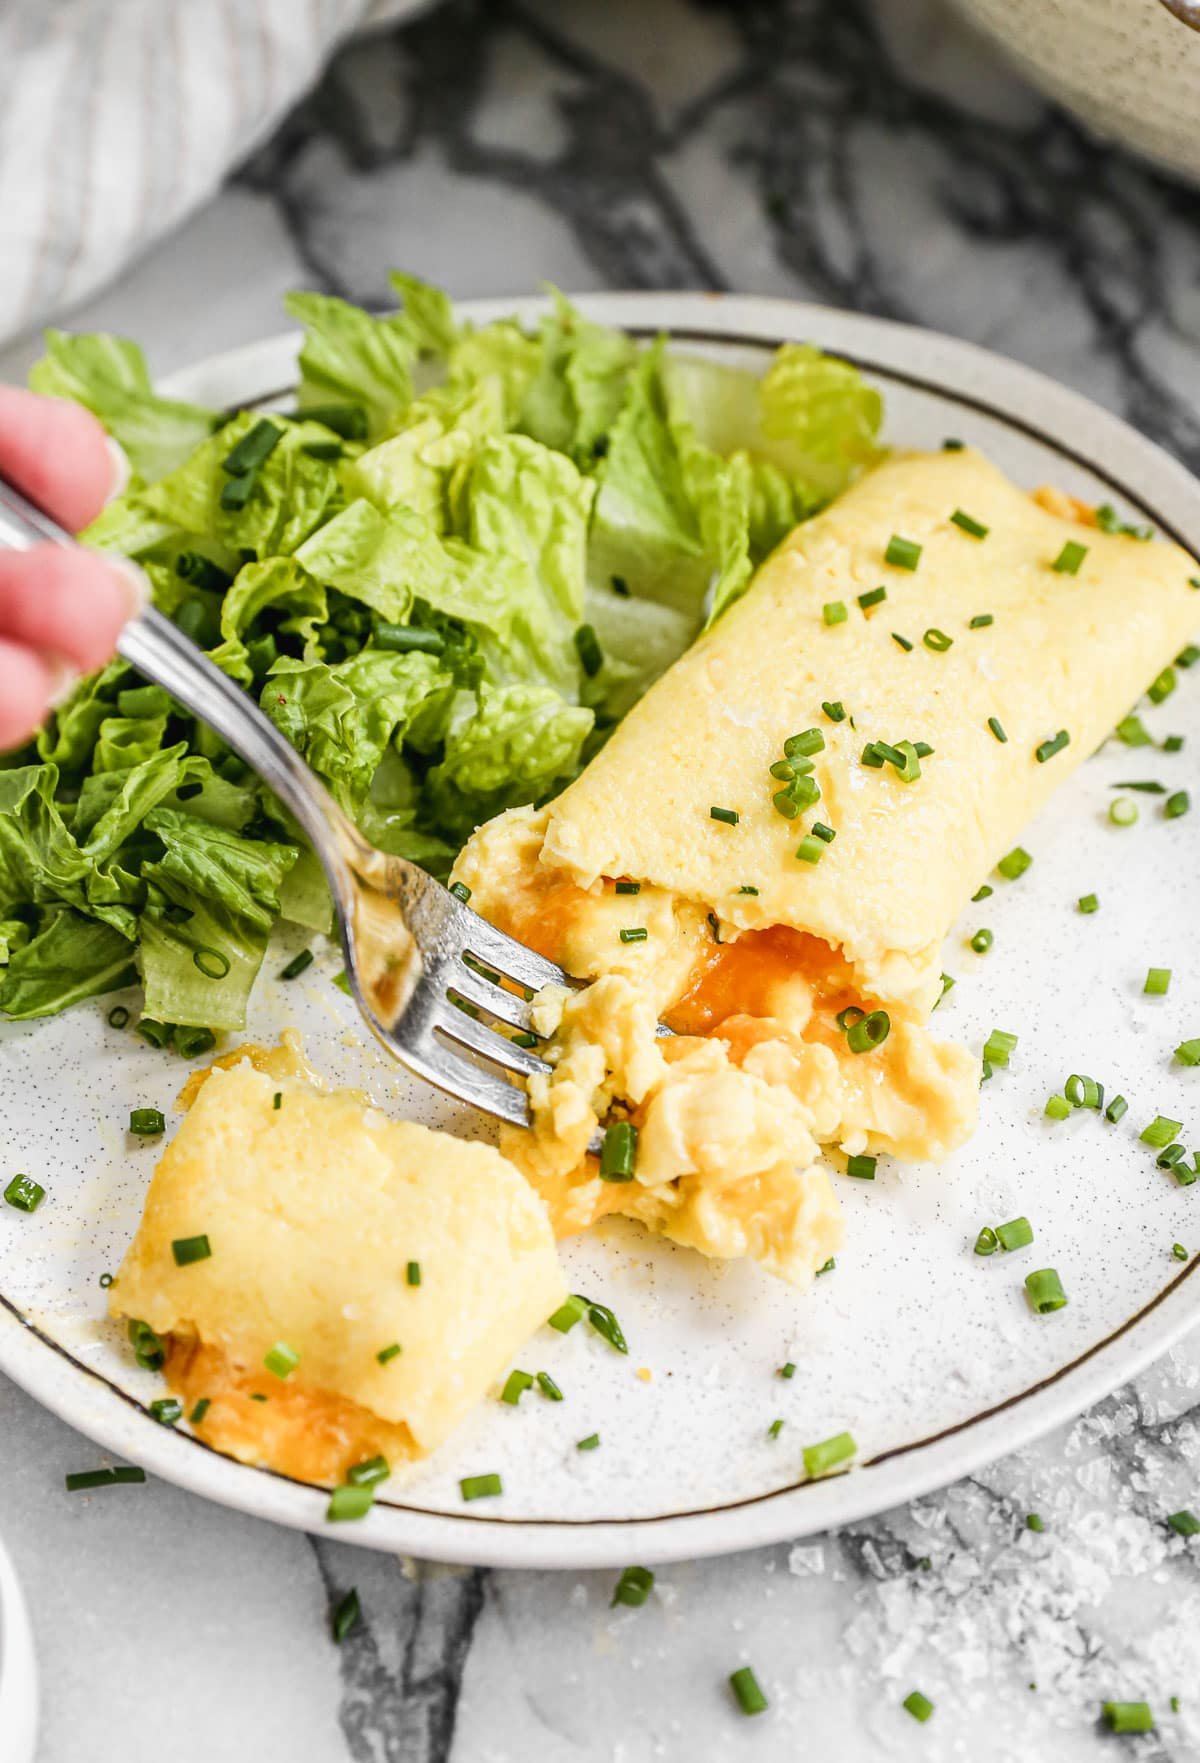 French omelette recipe